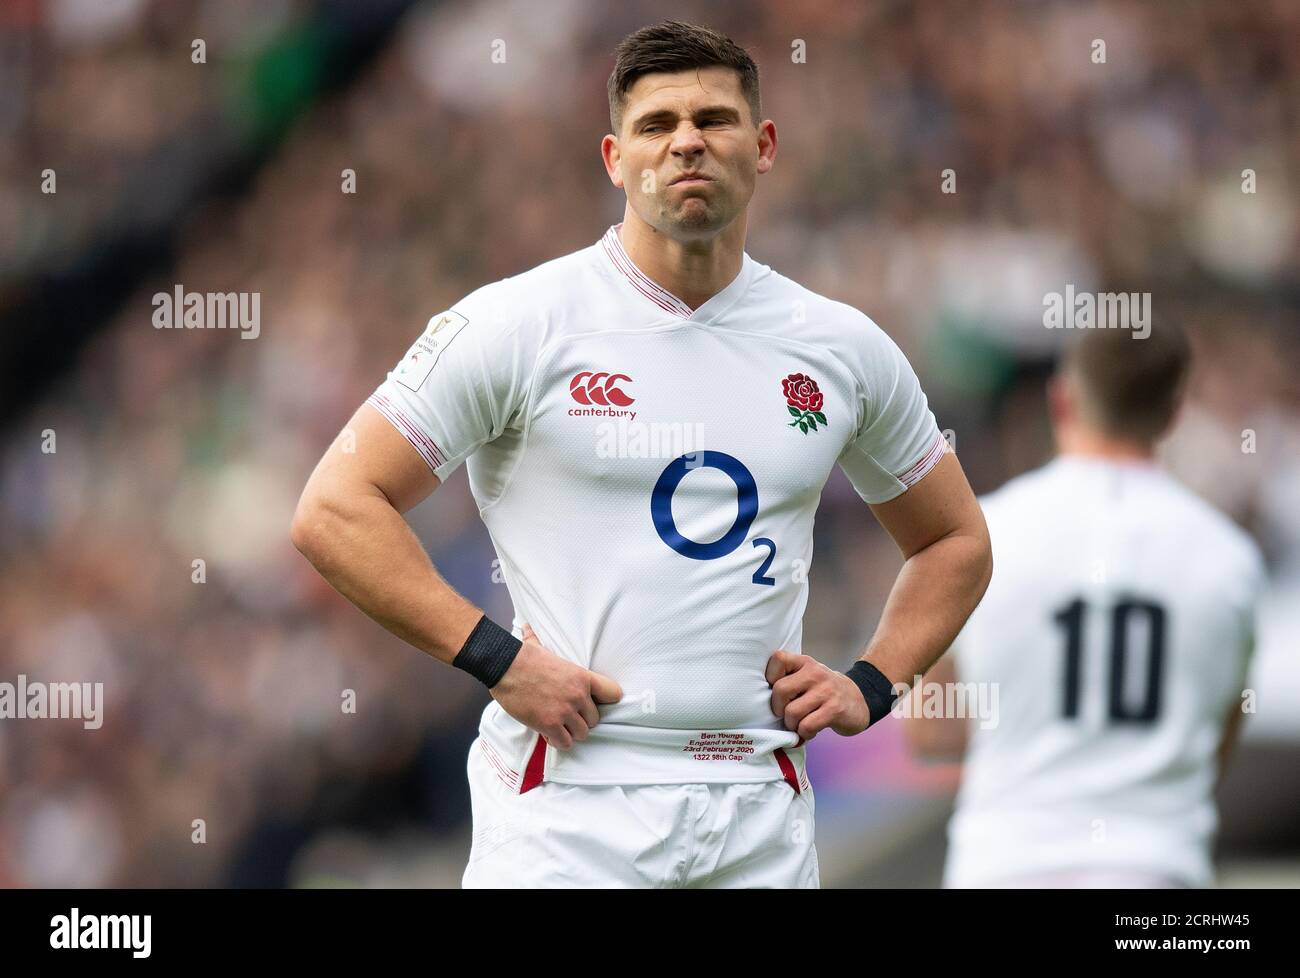 England's ben Youngs PHOTO CREDIT : © MARK PAIN / ALAMY STOCK PHOTO Foto Stock